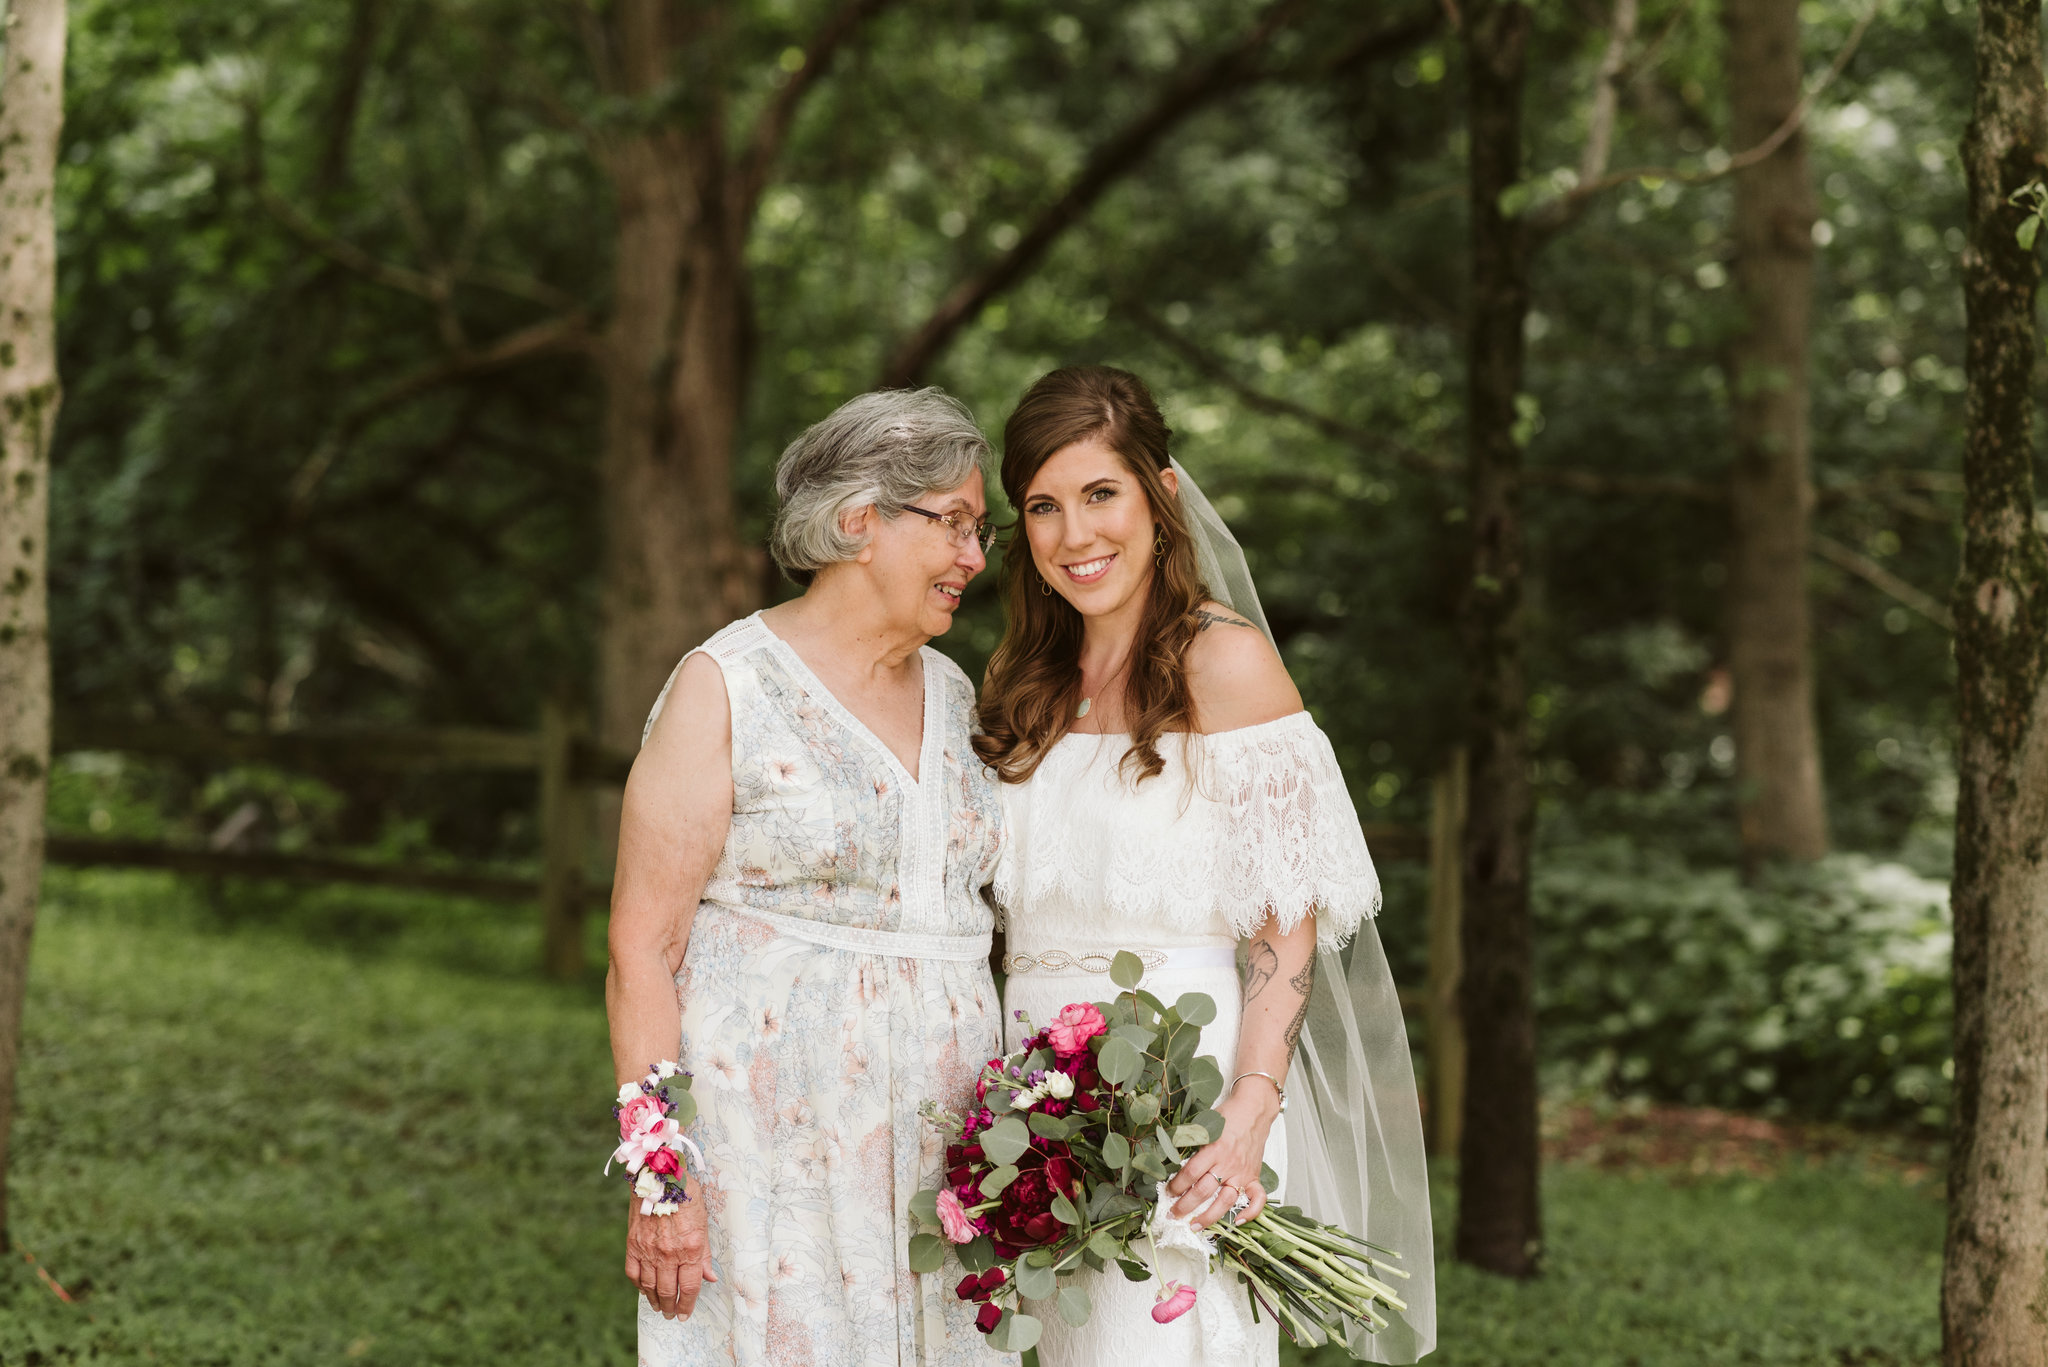  Annapolis, Quaker Wedding, Maryland Wedding Photographer, Intimate, Small Wedding, Vintage, DIY, Bride with Mother of the Bride, Portrait 